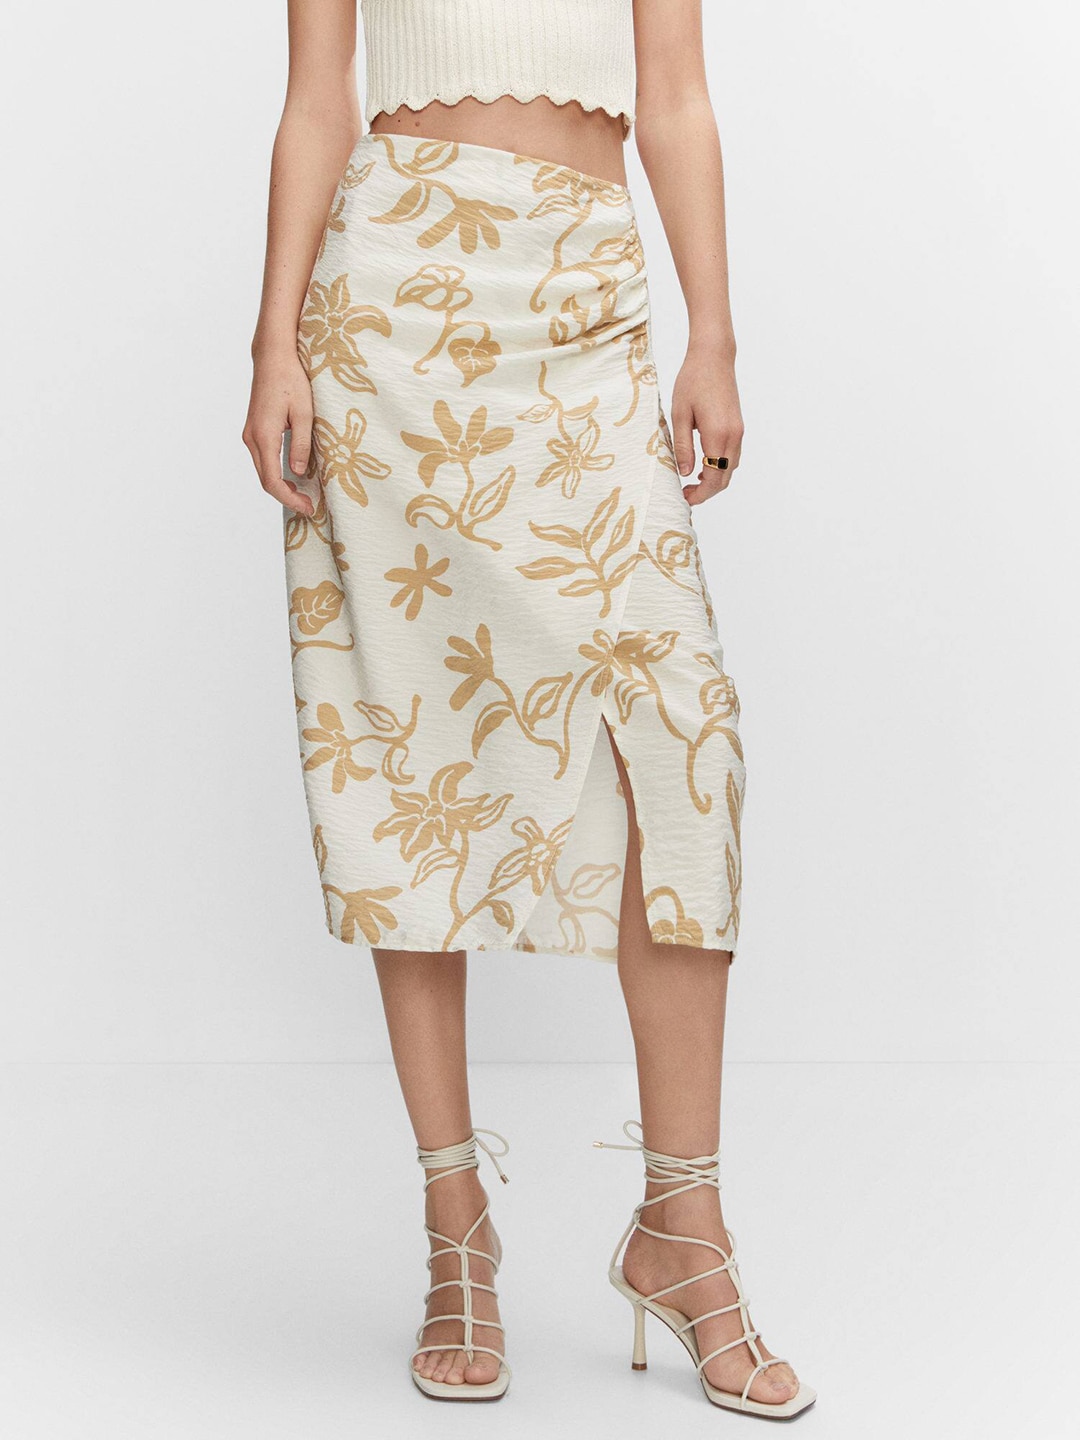 MANGO Floral Printed Side Slit A-Line Skirt Price in India